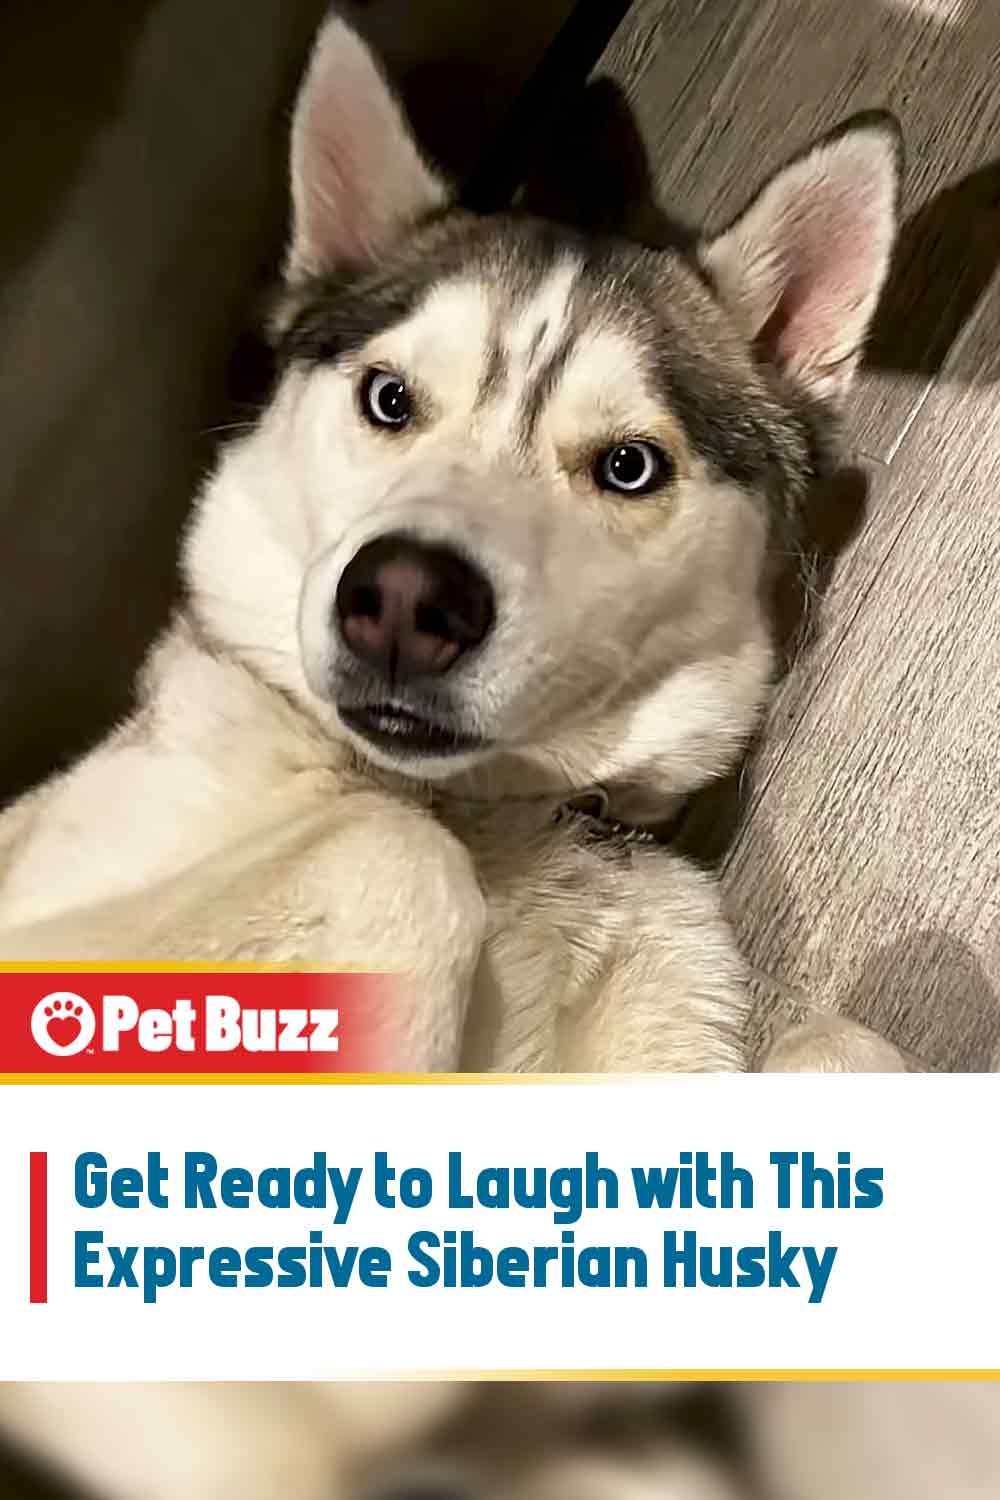 Get Ready to Laugh with This Expressive Siberian Husky